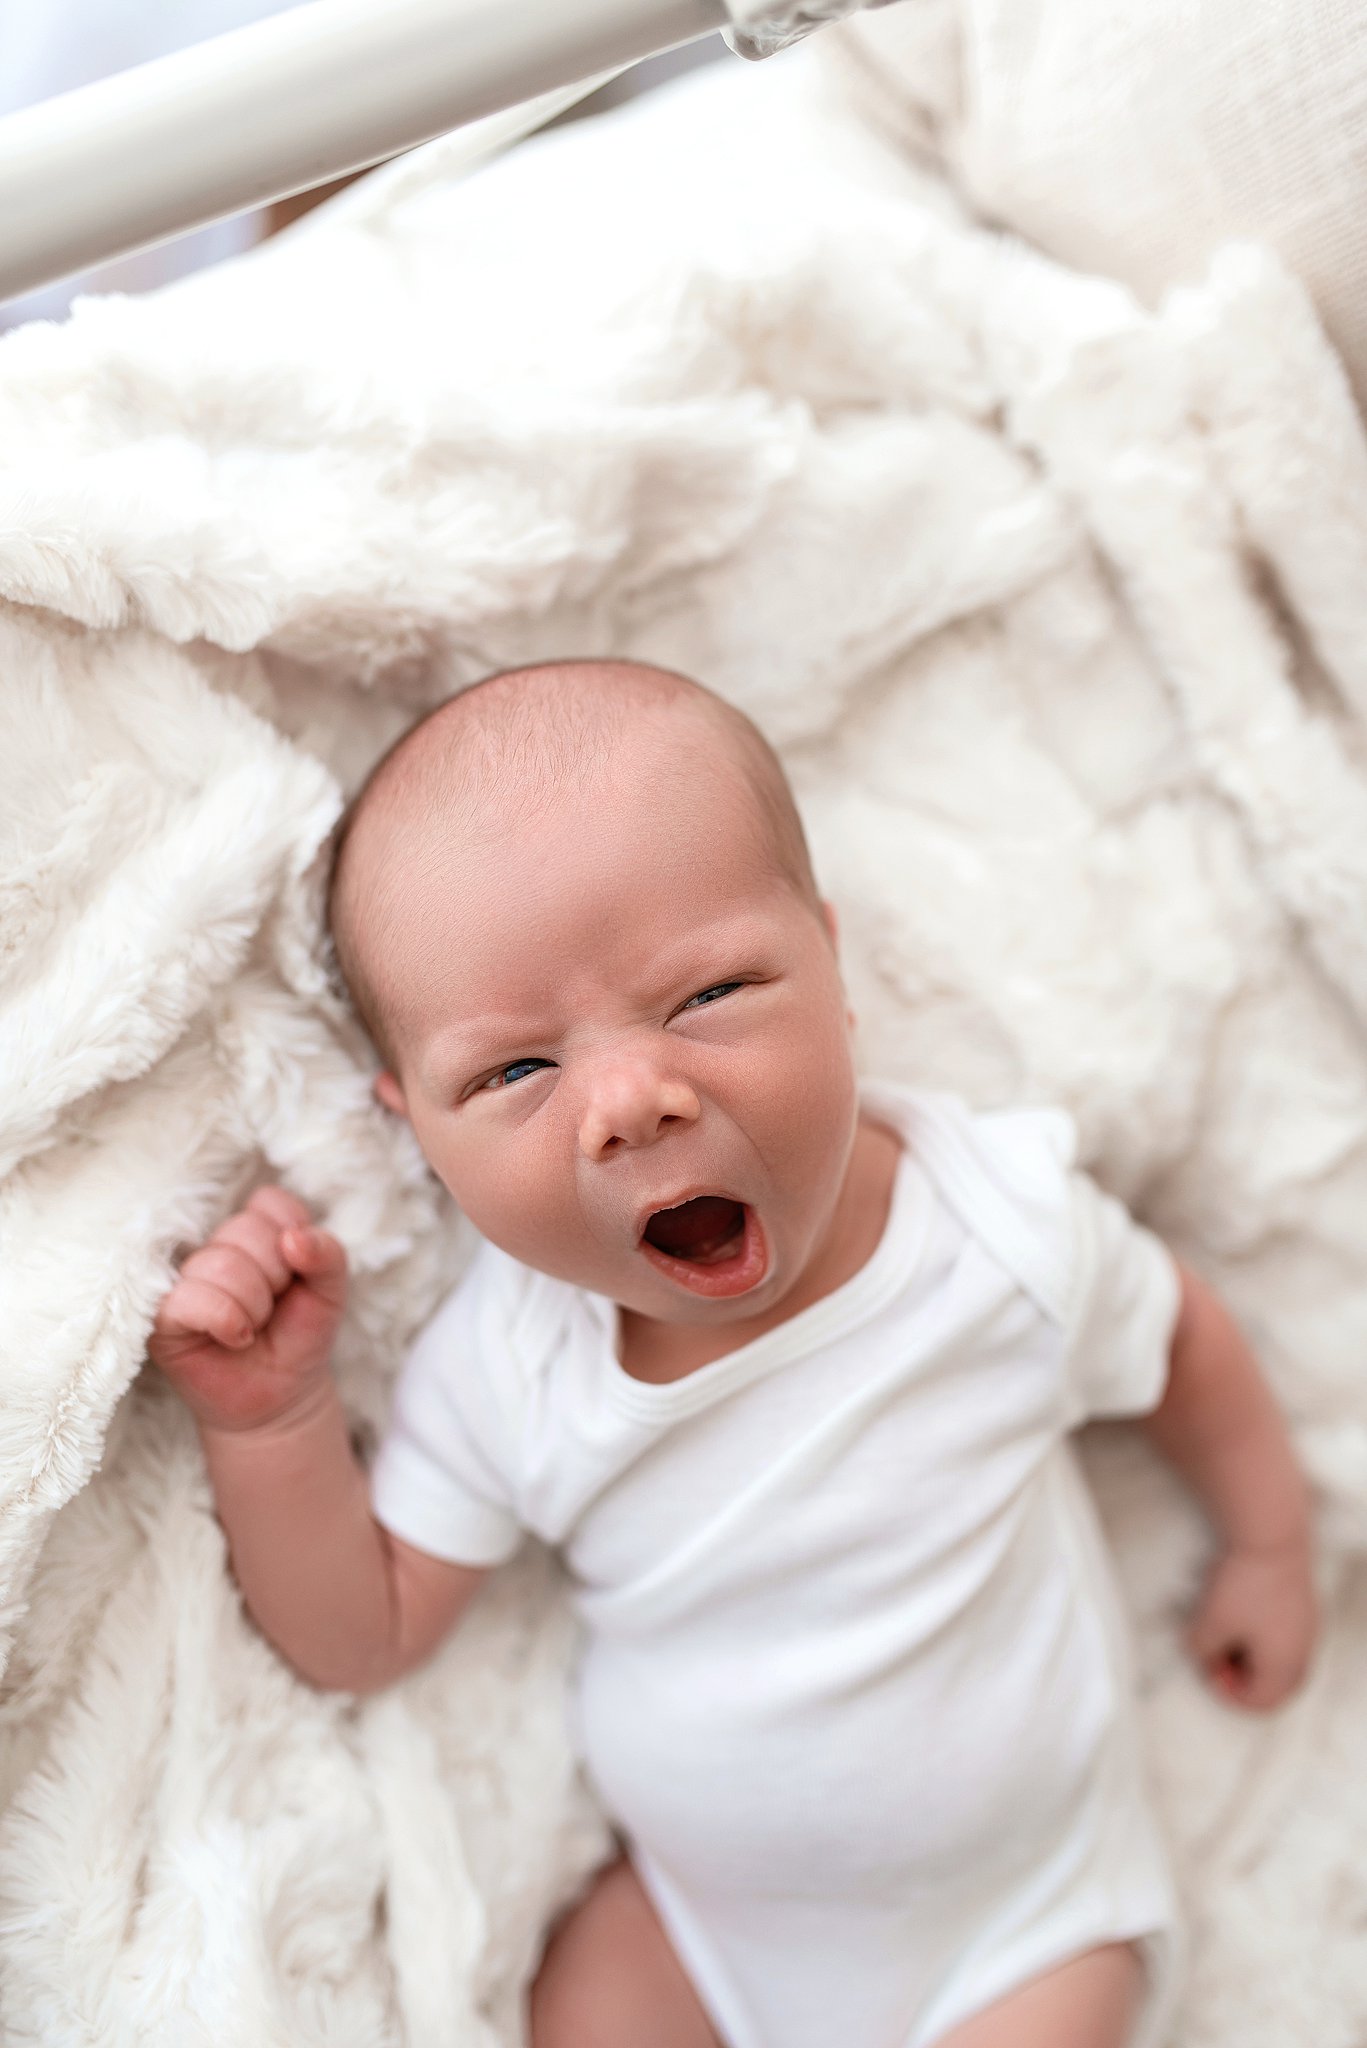 A newborn baby yawns while laying on a soft blanket in a white onesie daycare in cleveland